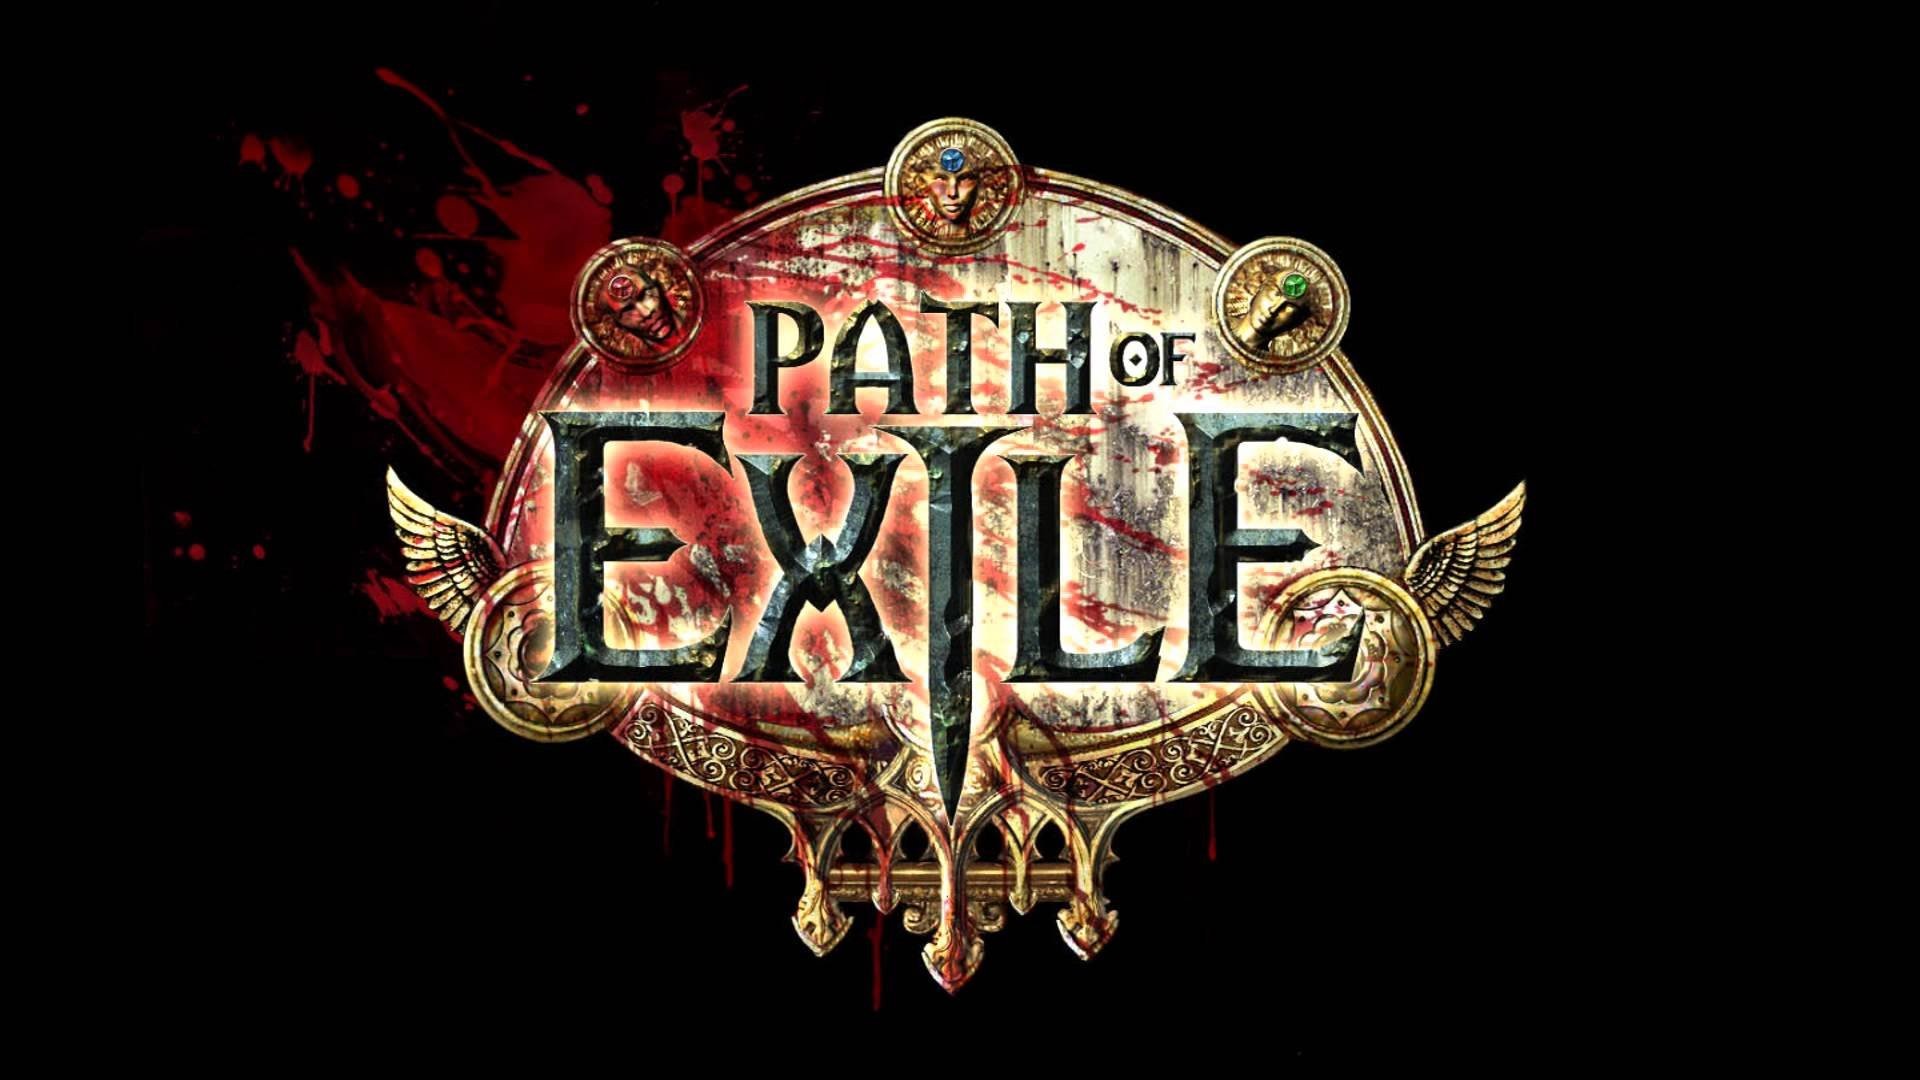 Pathofexile com. Path of Exile. Path of Exile картинки. Path of Exile лого. Path of Exile Chaos.